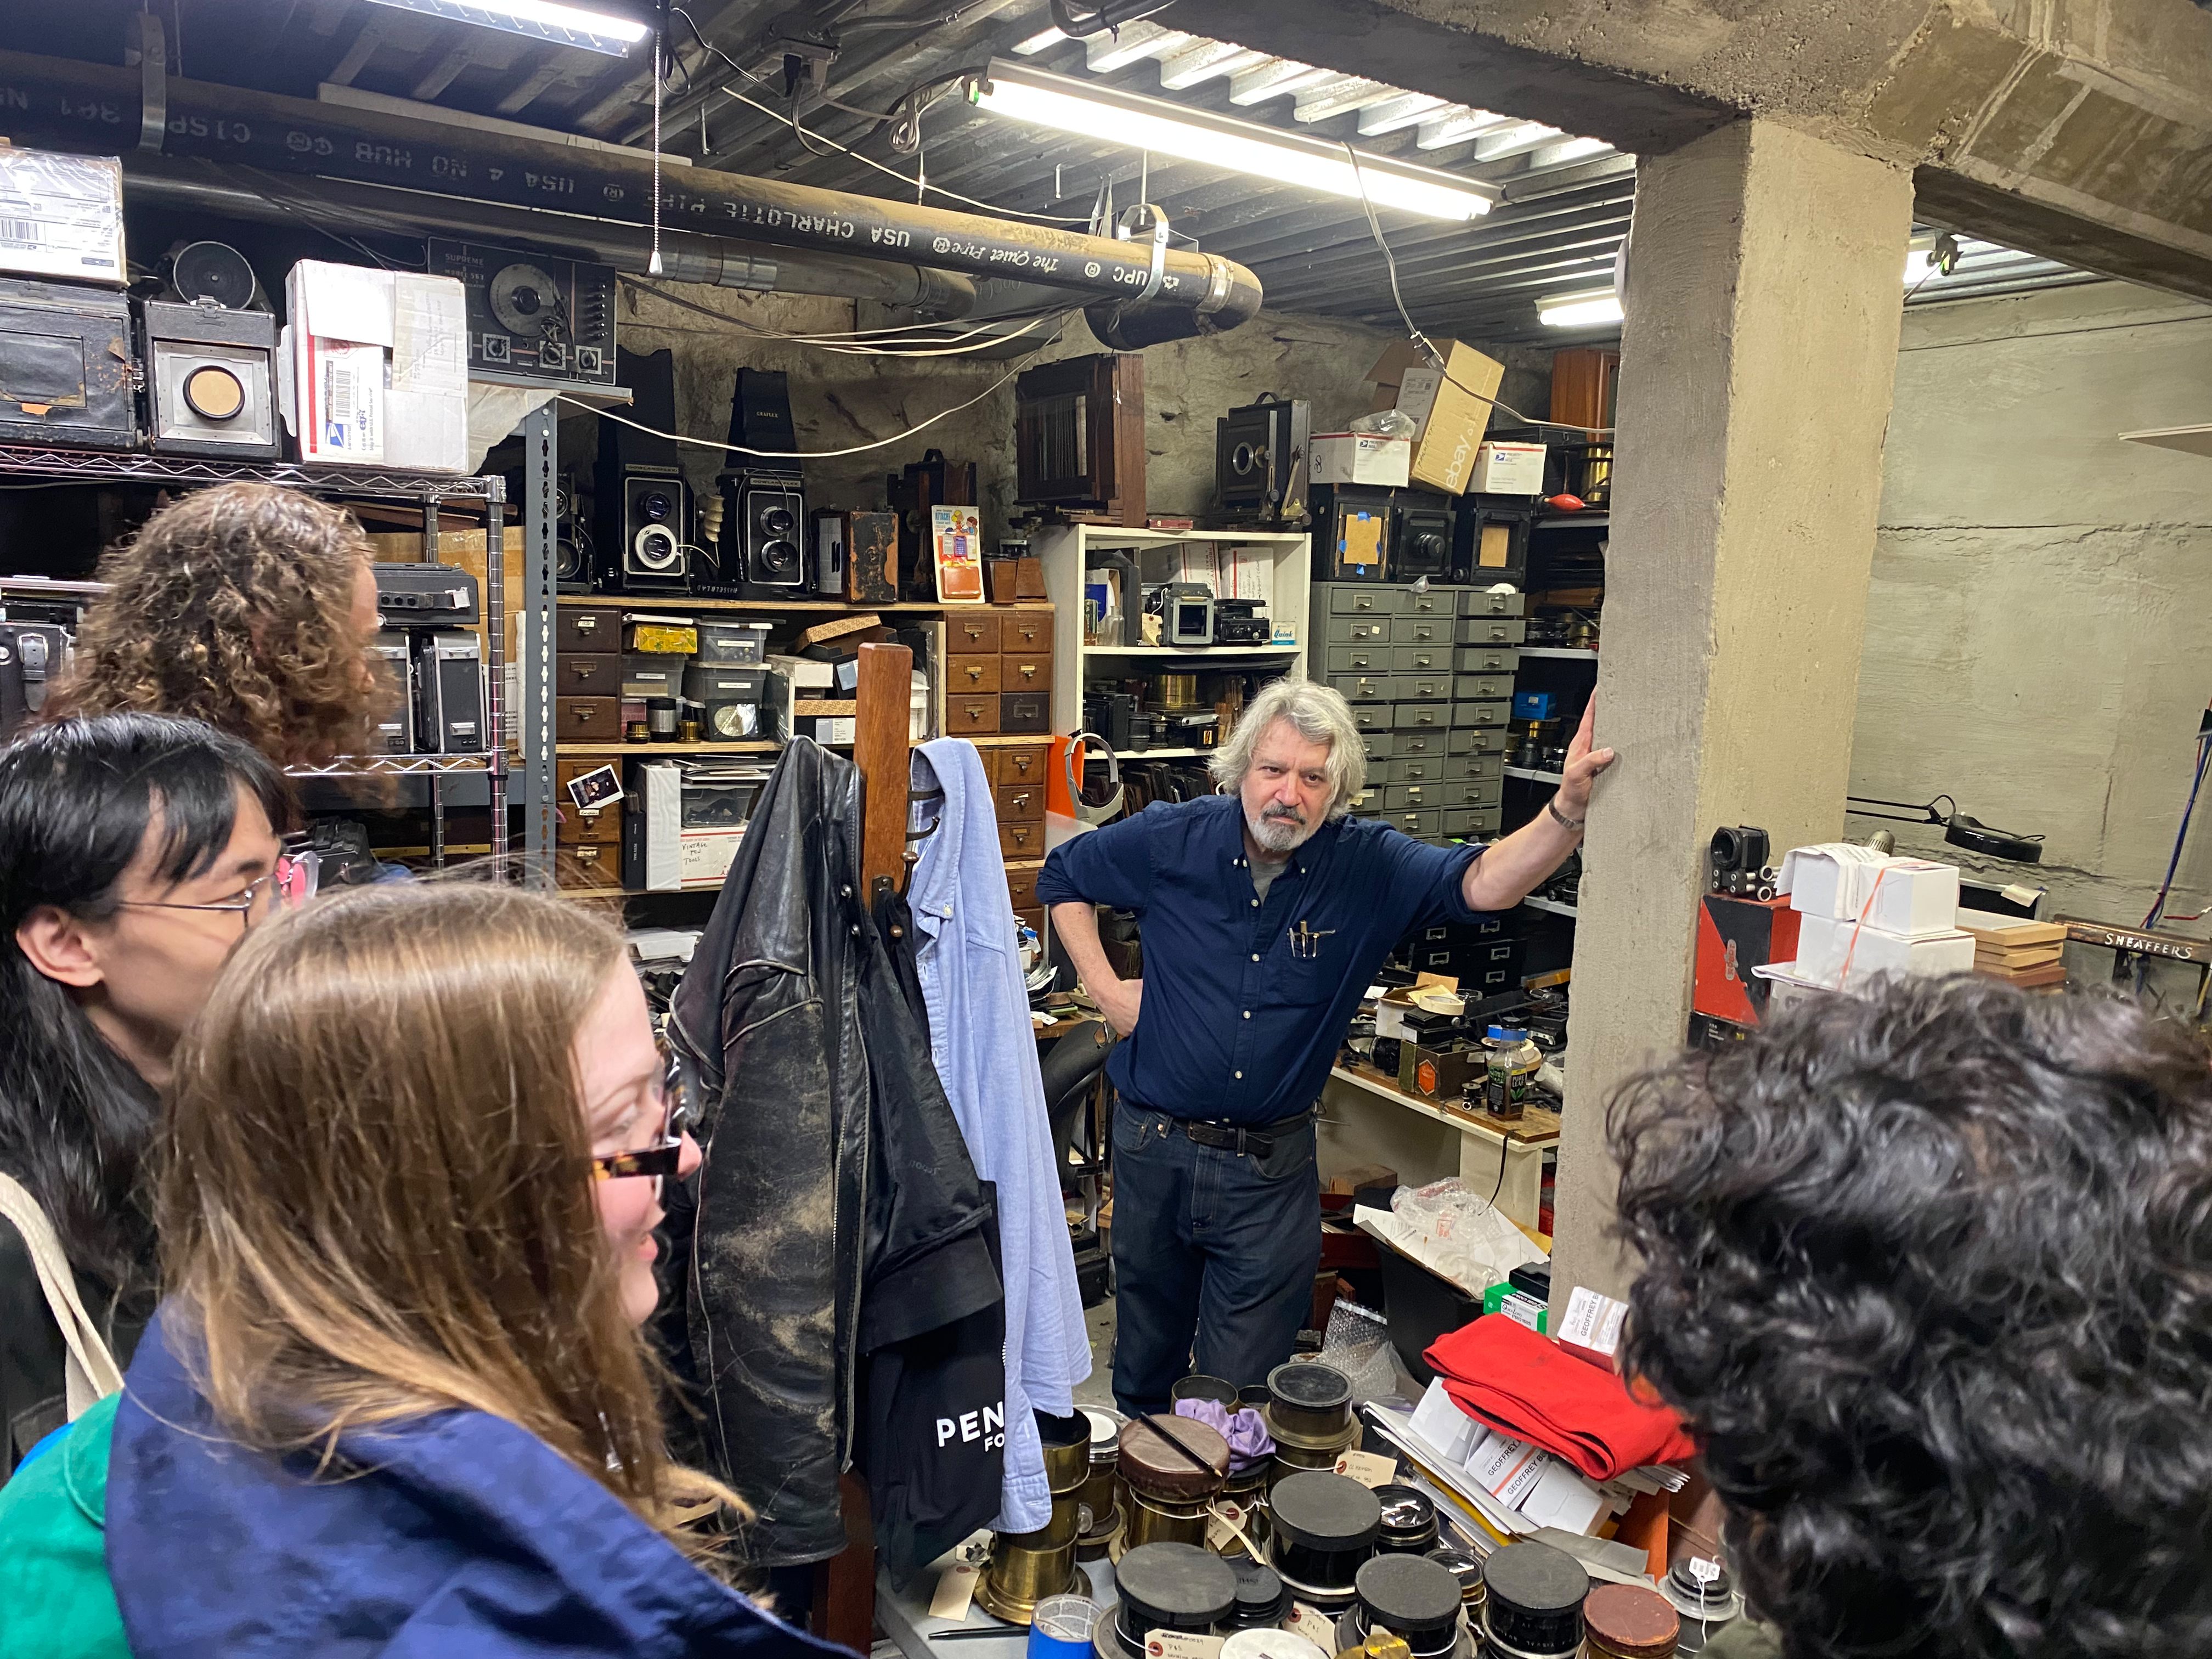 Geoffrey Berliner in the basement of Penumbra Foundation shows off a treasure trove of 19th century camera gear.